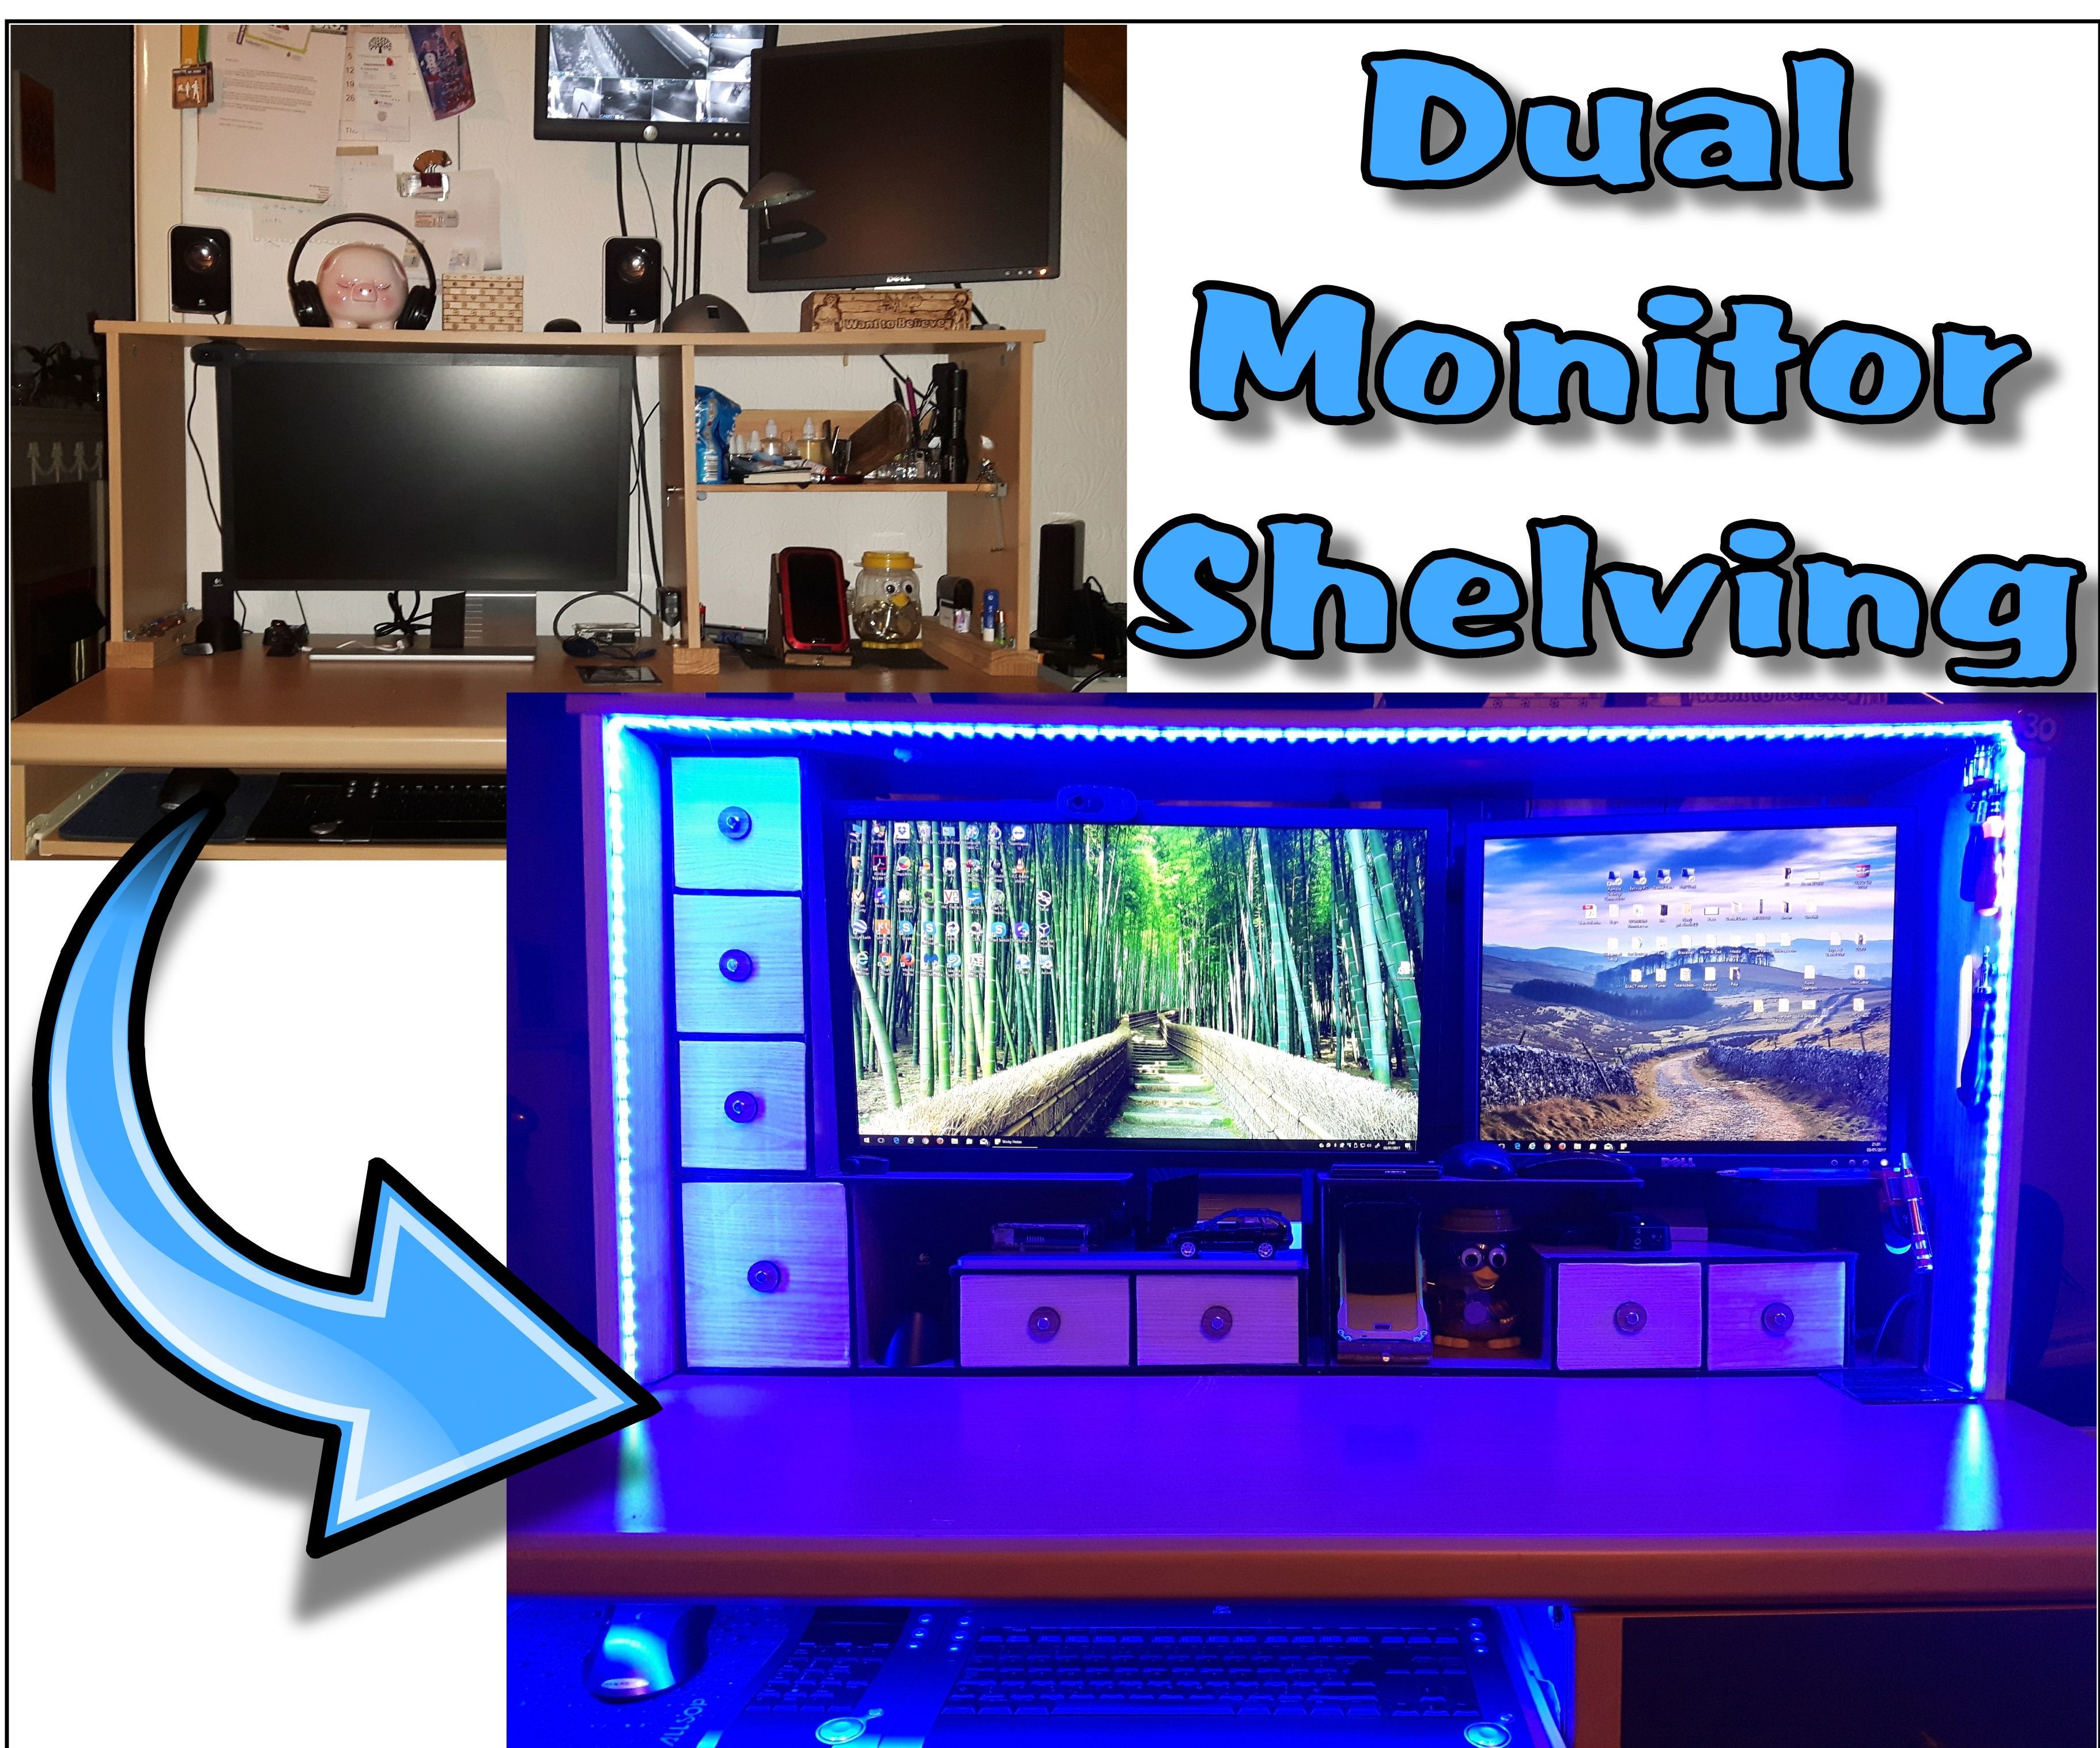 Dual-monitor Shelving Made Out of Spare Laminate Flooring